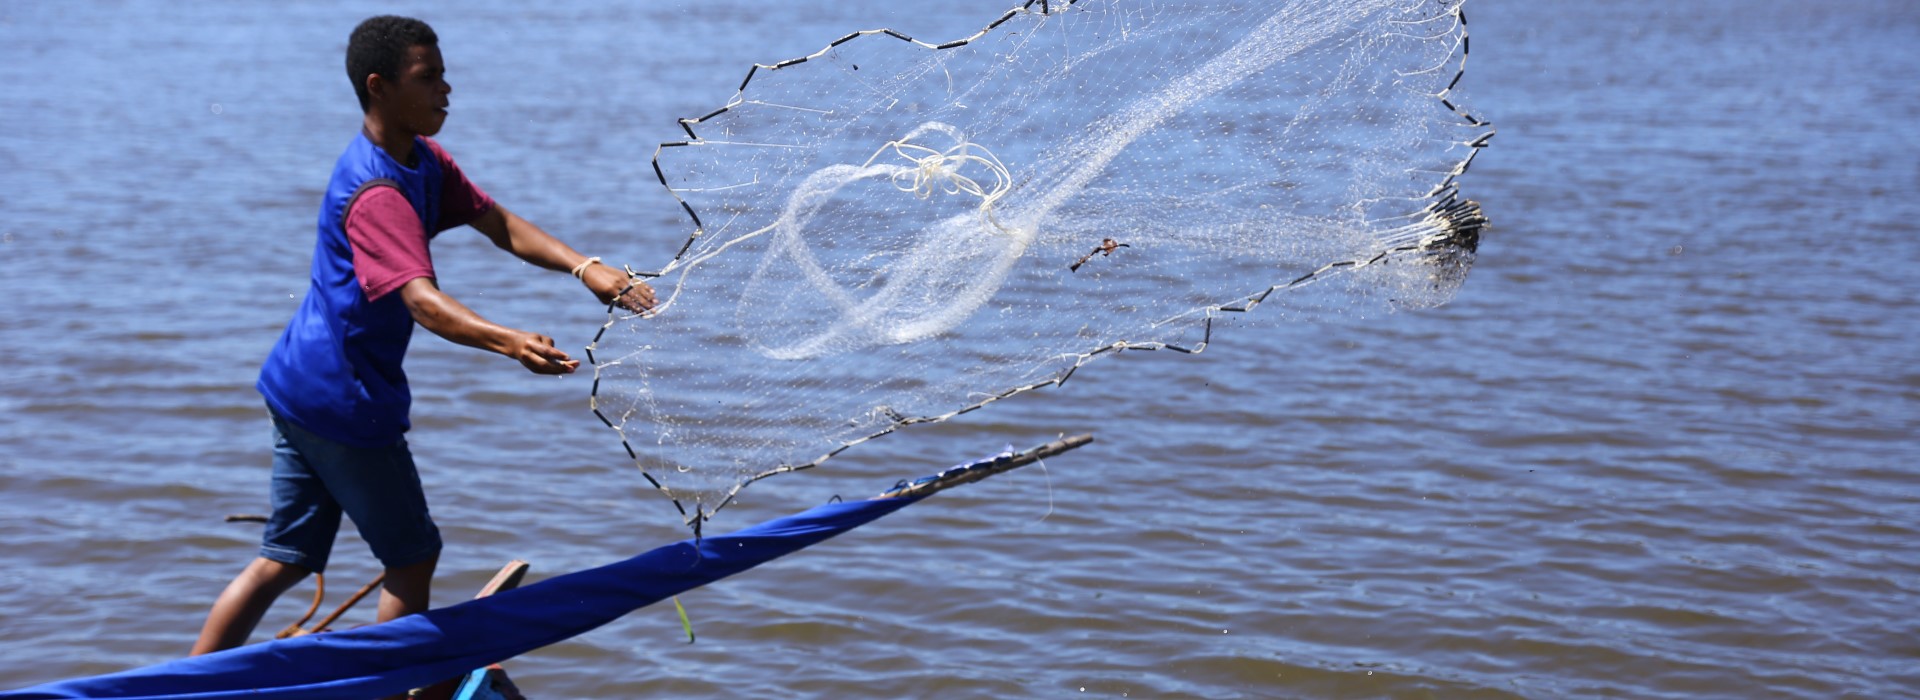 A person holding a net in the air.